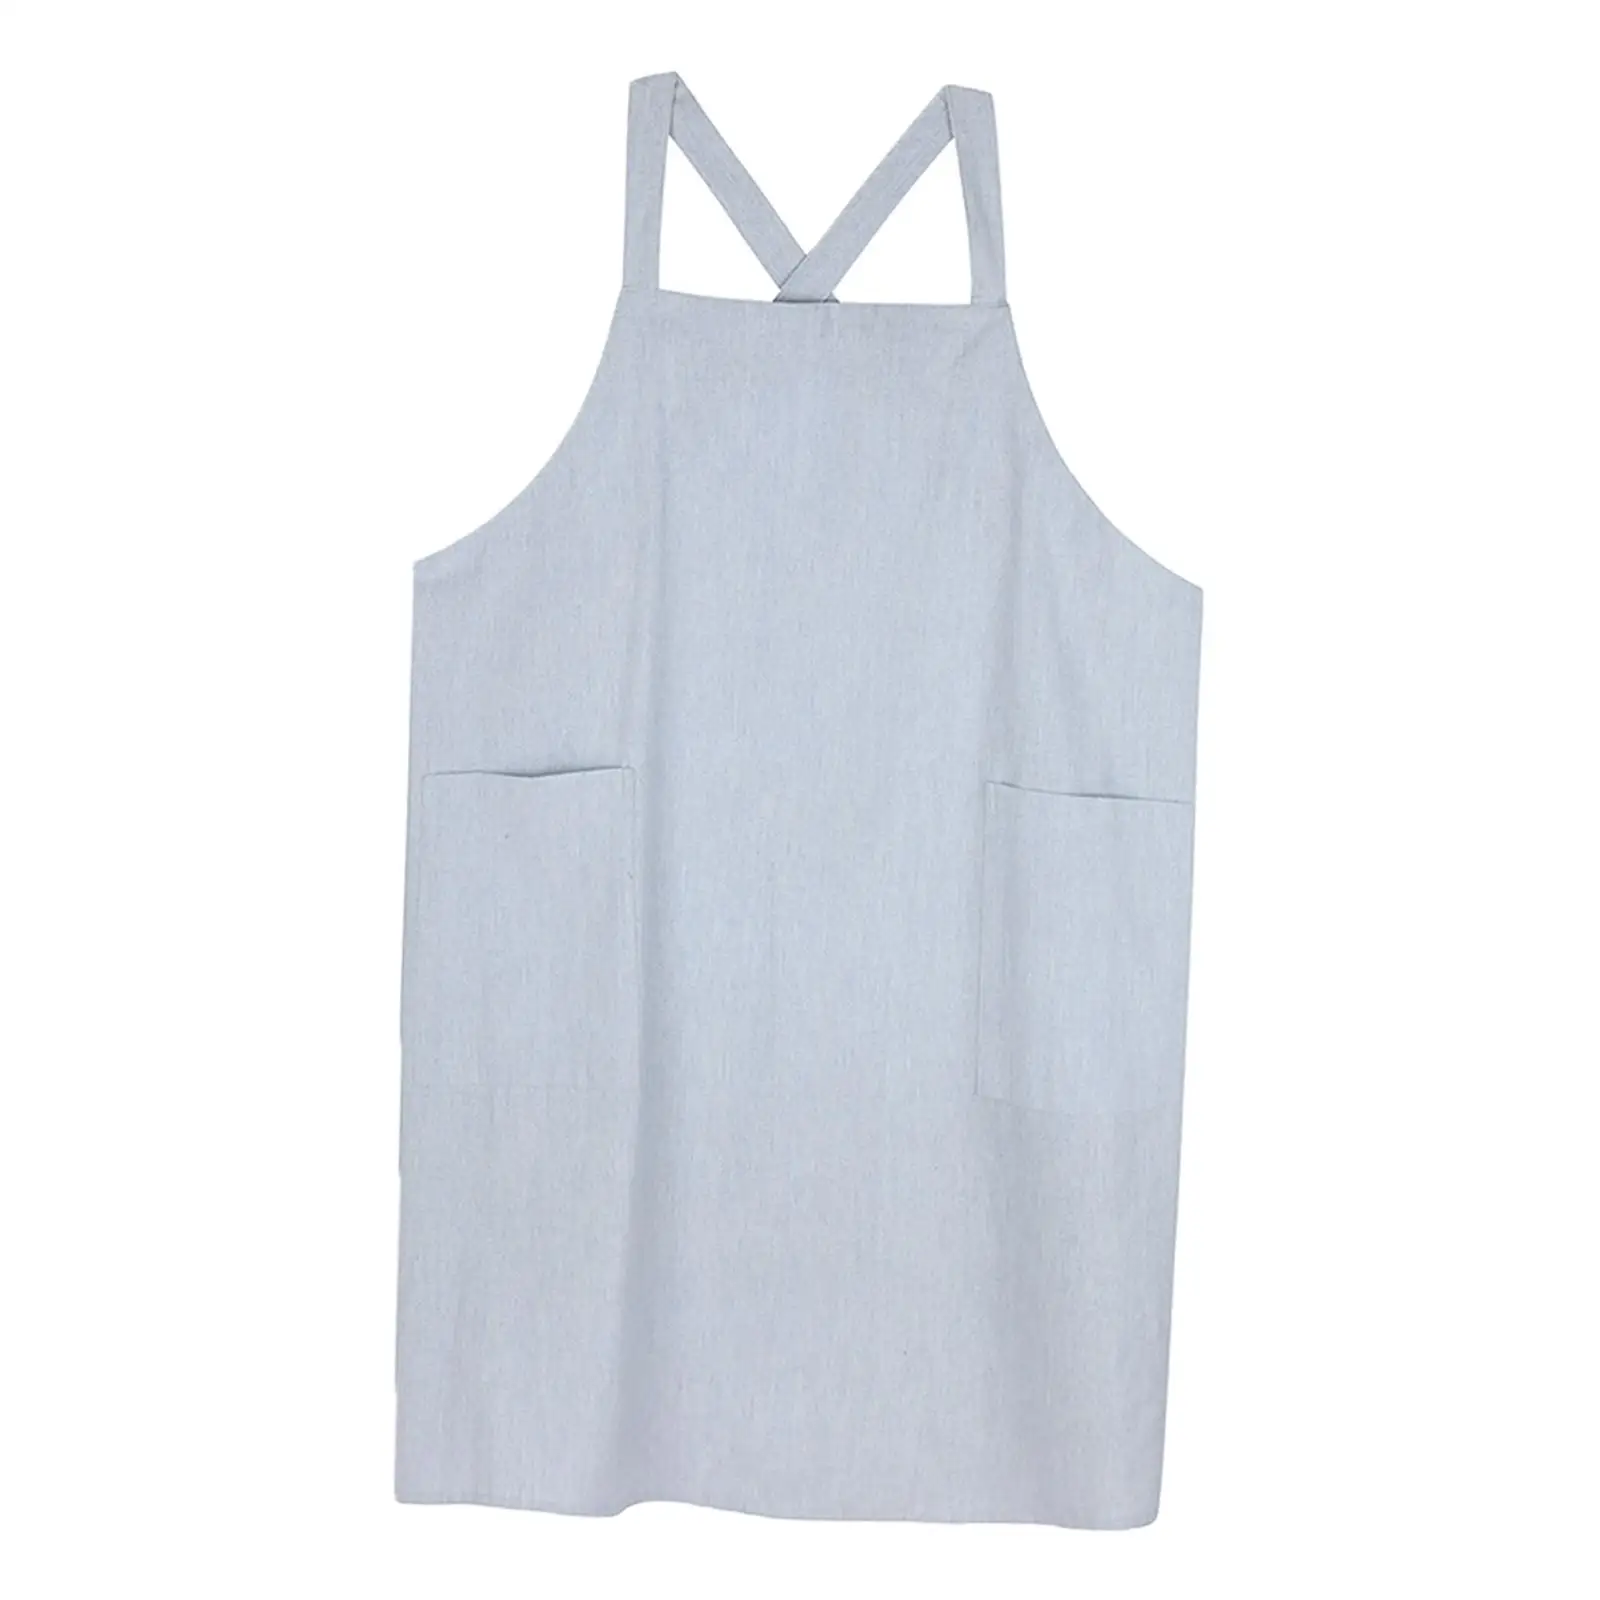 Cotton Kitchen Apron Barista Apron Pinafore Dress with Pockets Professional Cooking Gardening Painting for Hotel Waiter Woman